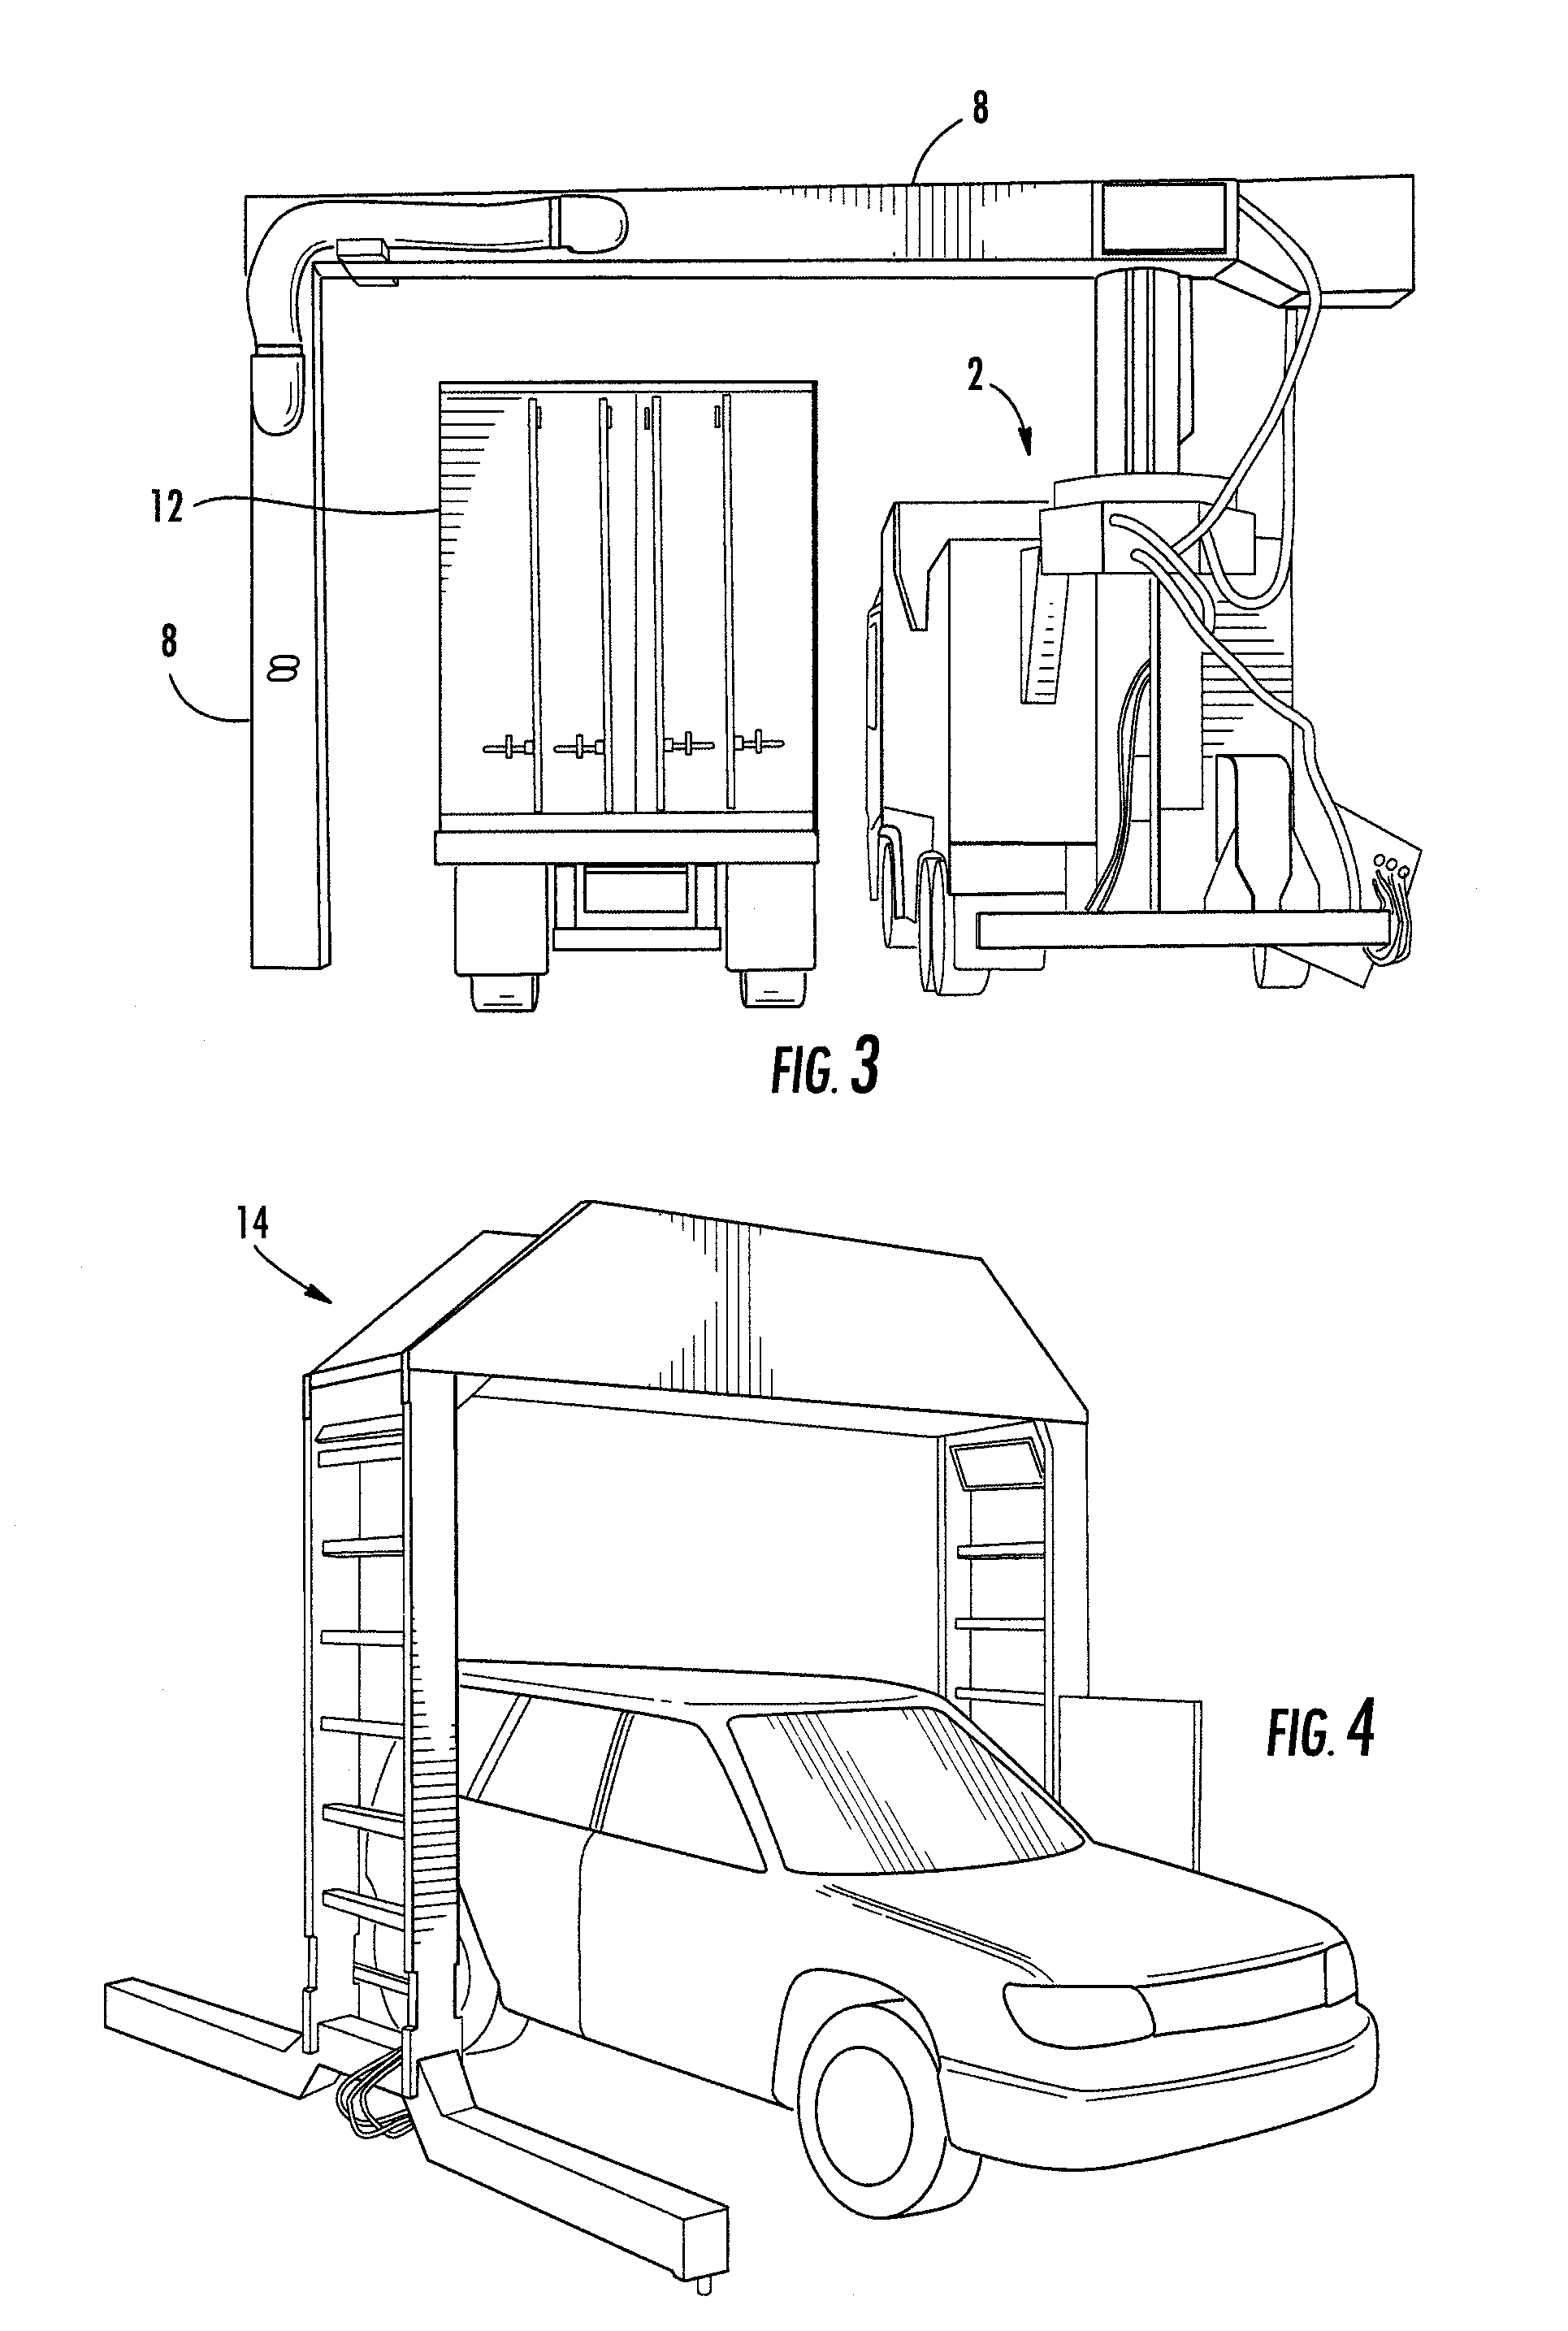 Method and apparatus for scanning objects in transit